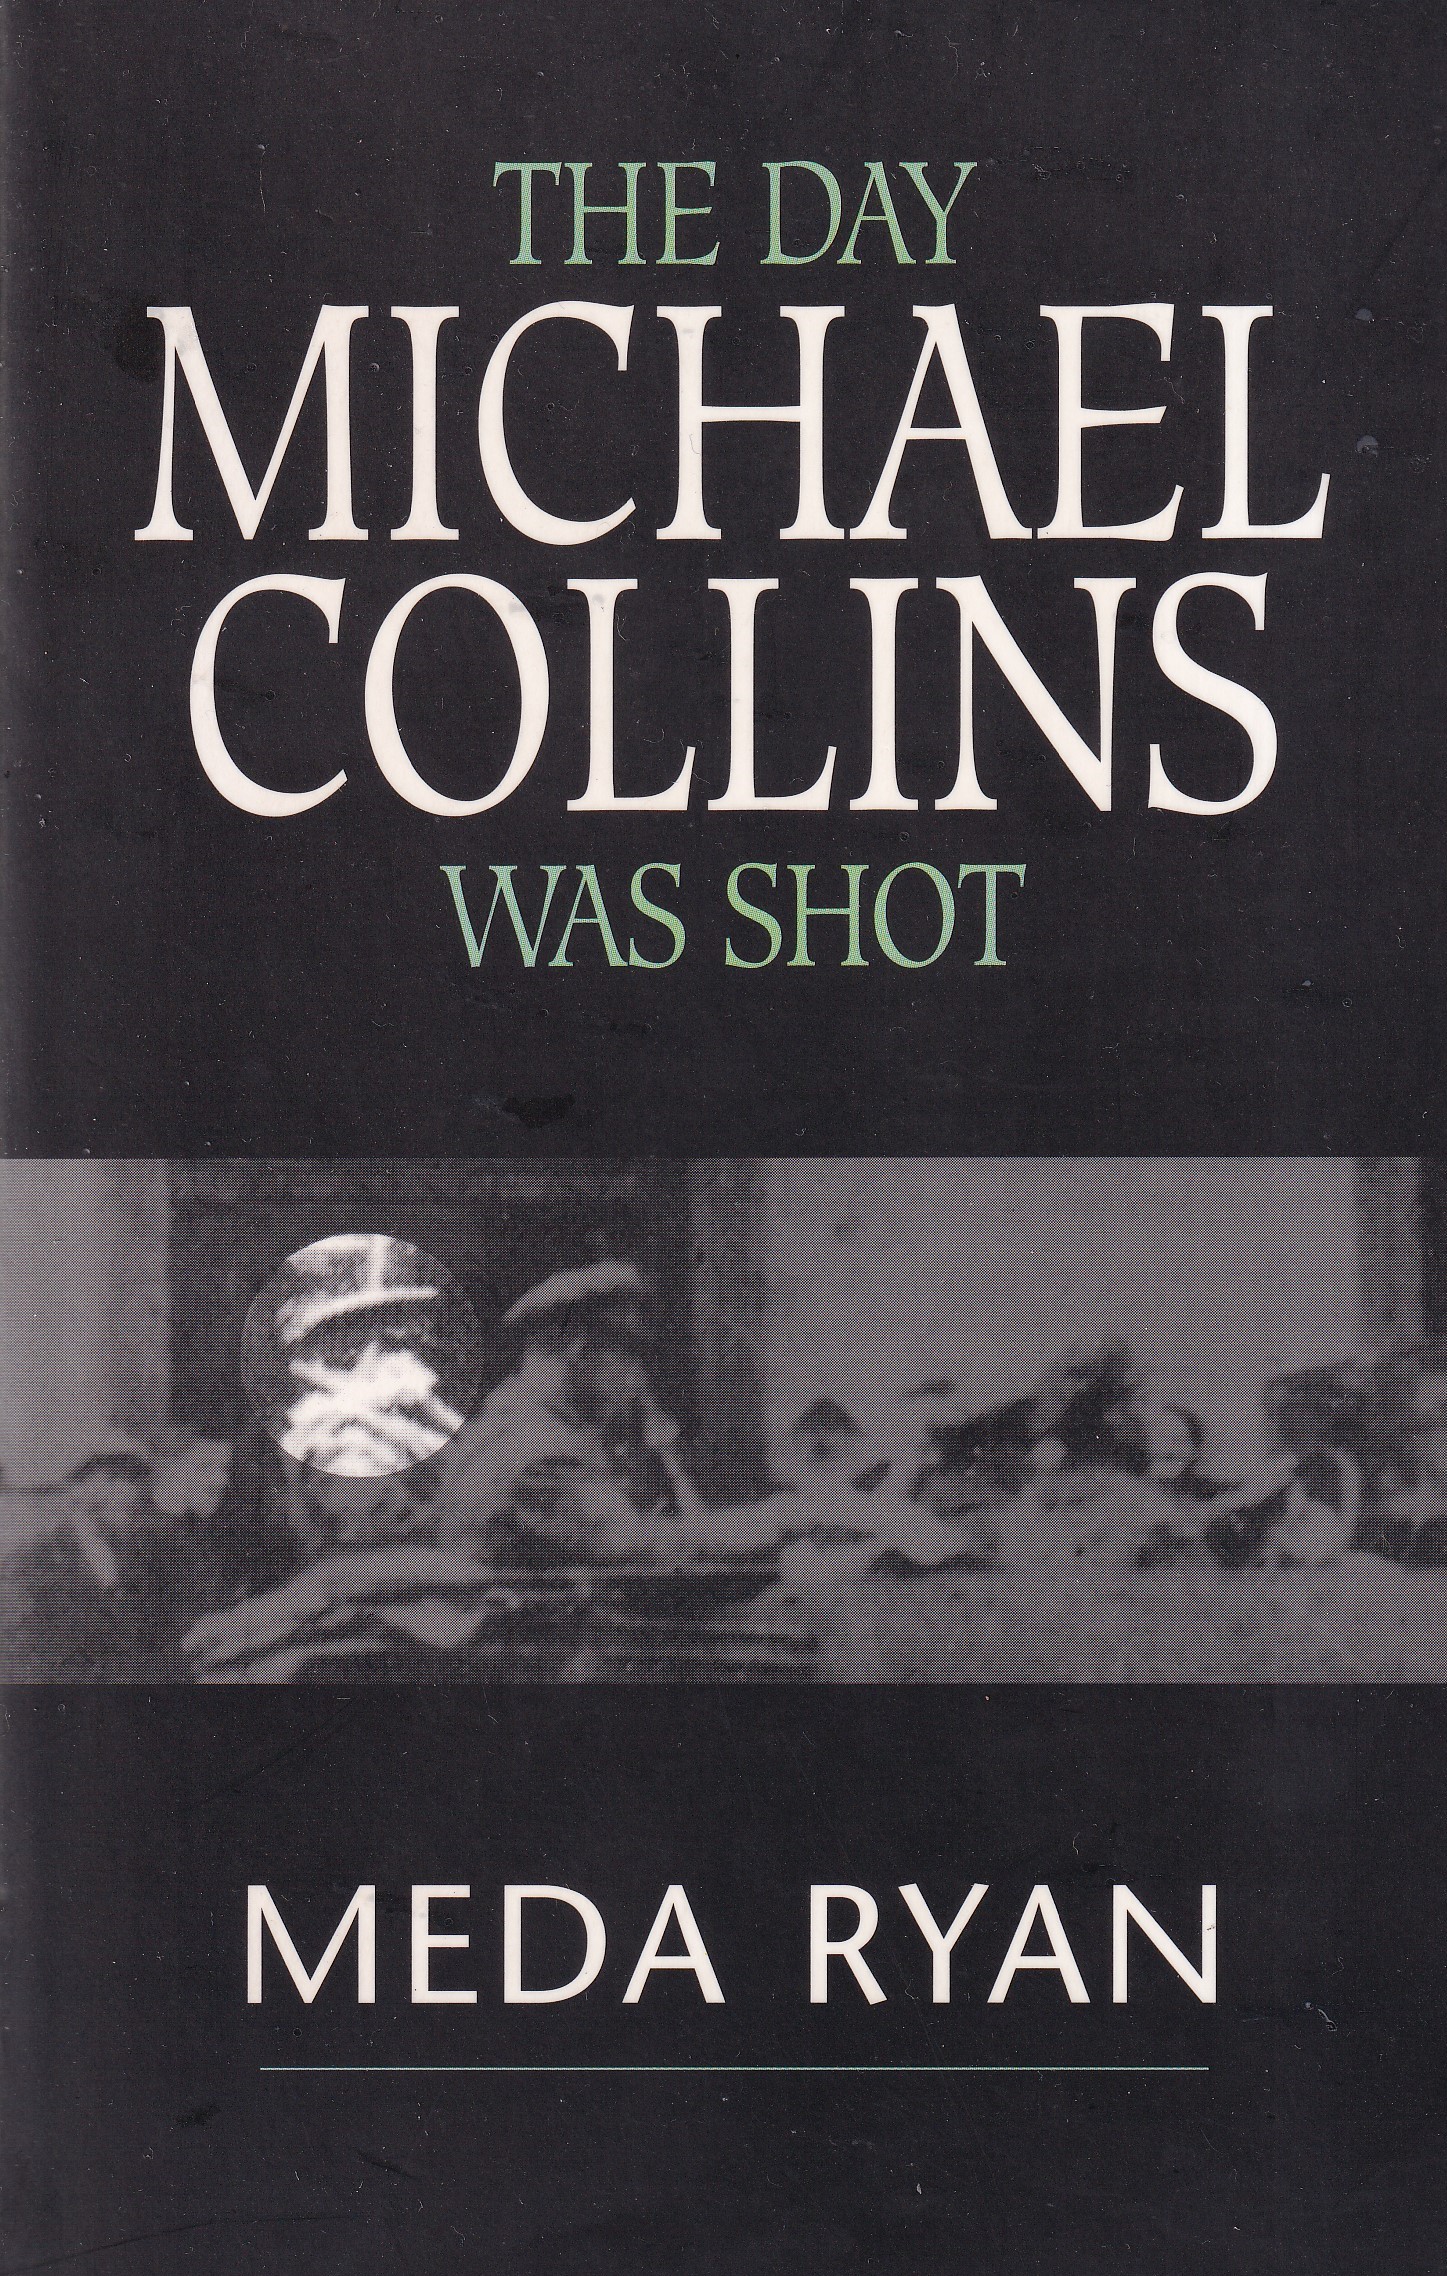 The Day Michael Collins Was Shot by Meda Ryan